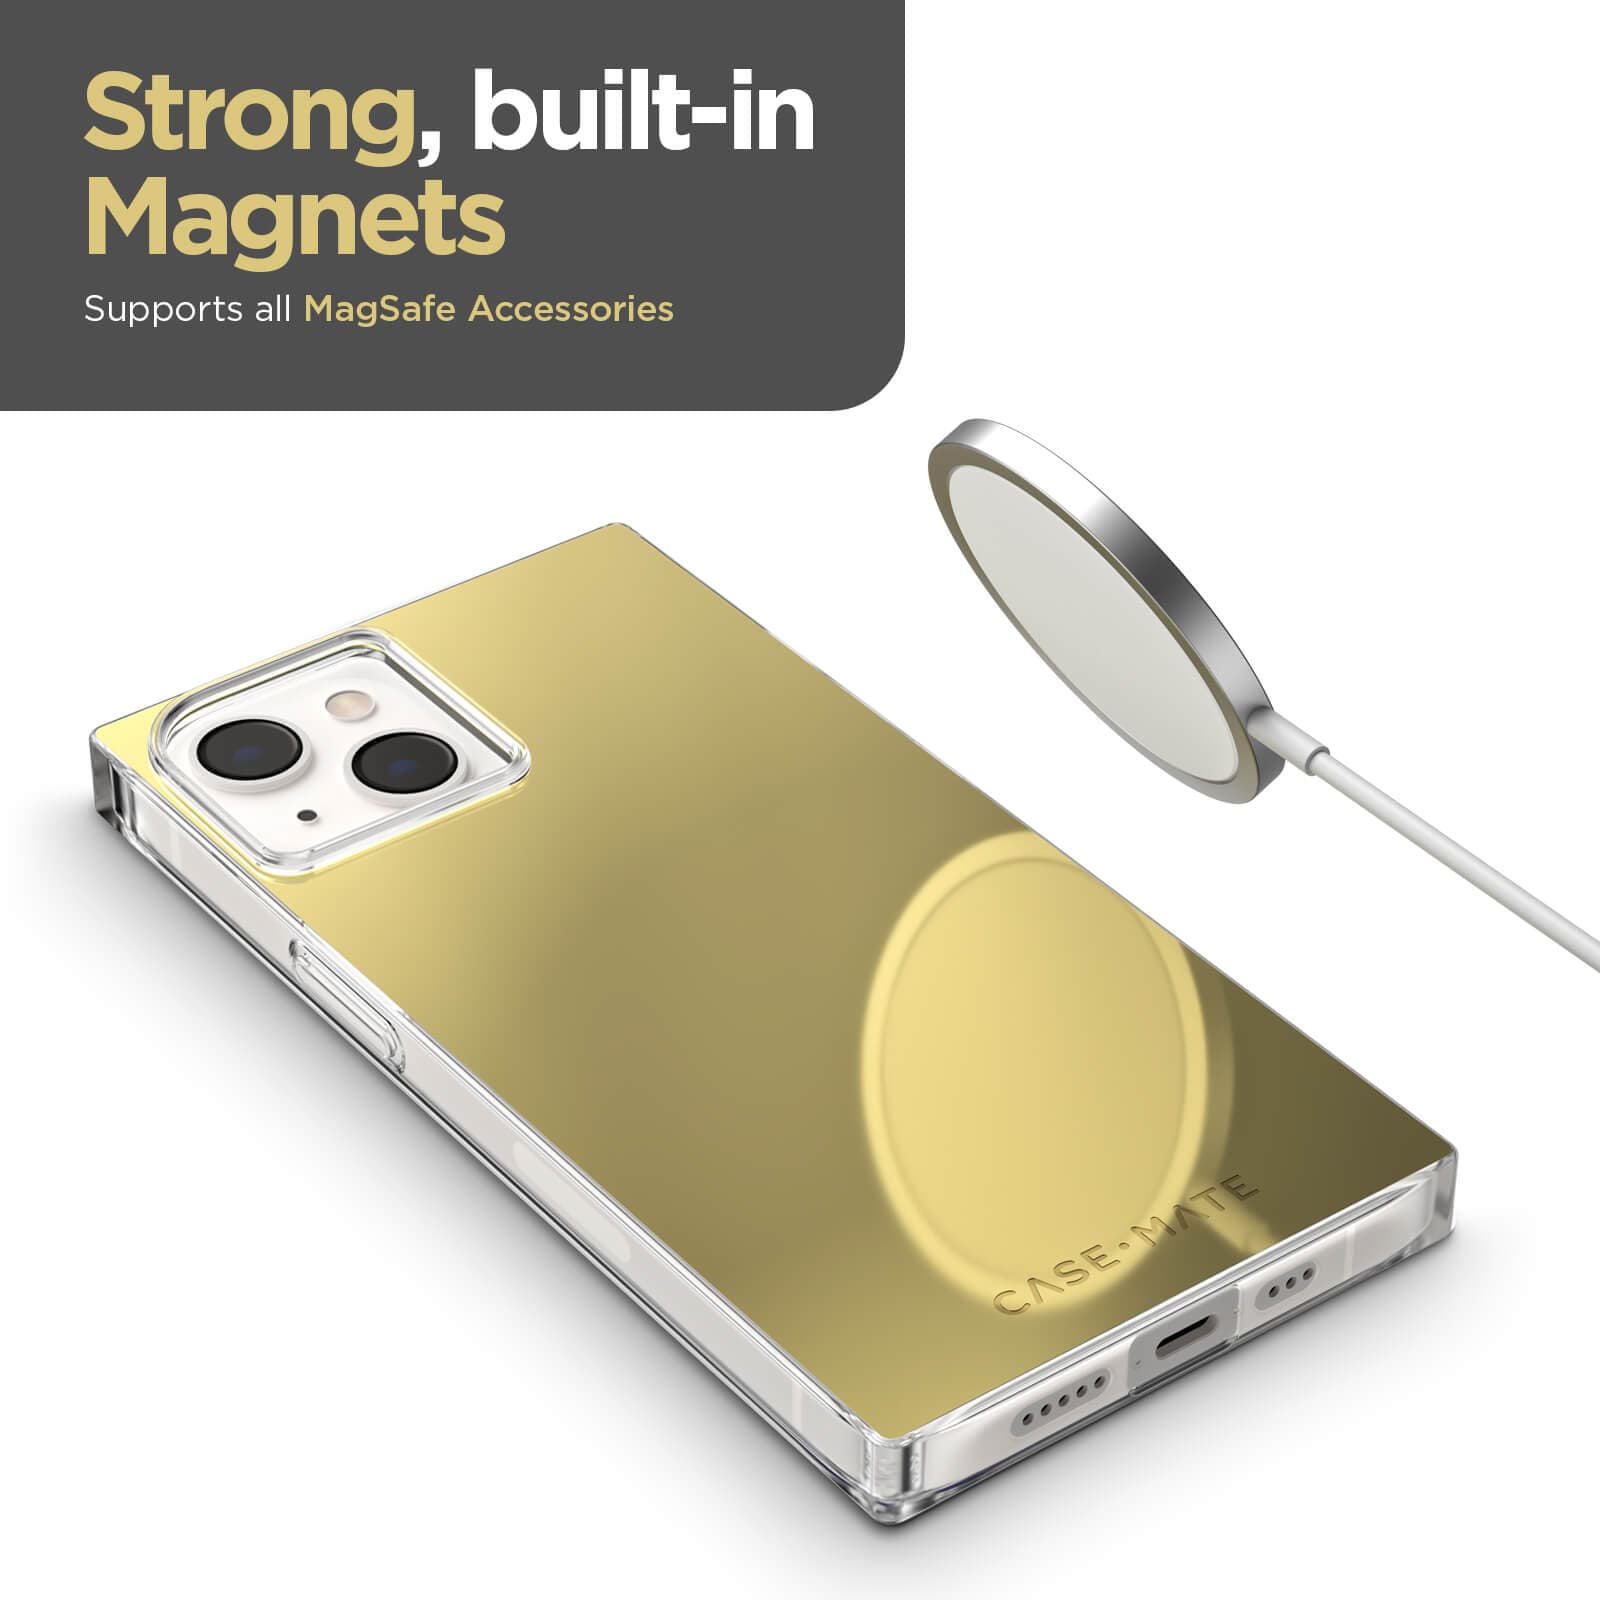 Strong, built-in magnets. Supports all MagSafe accessories. color::Gold